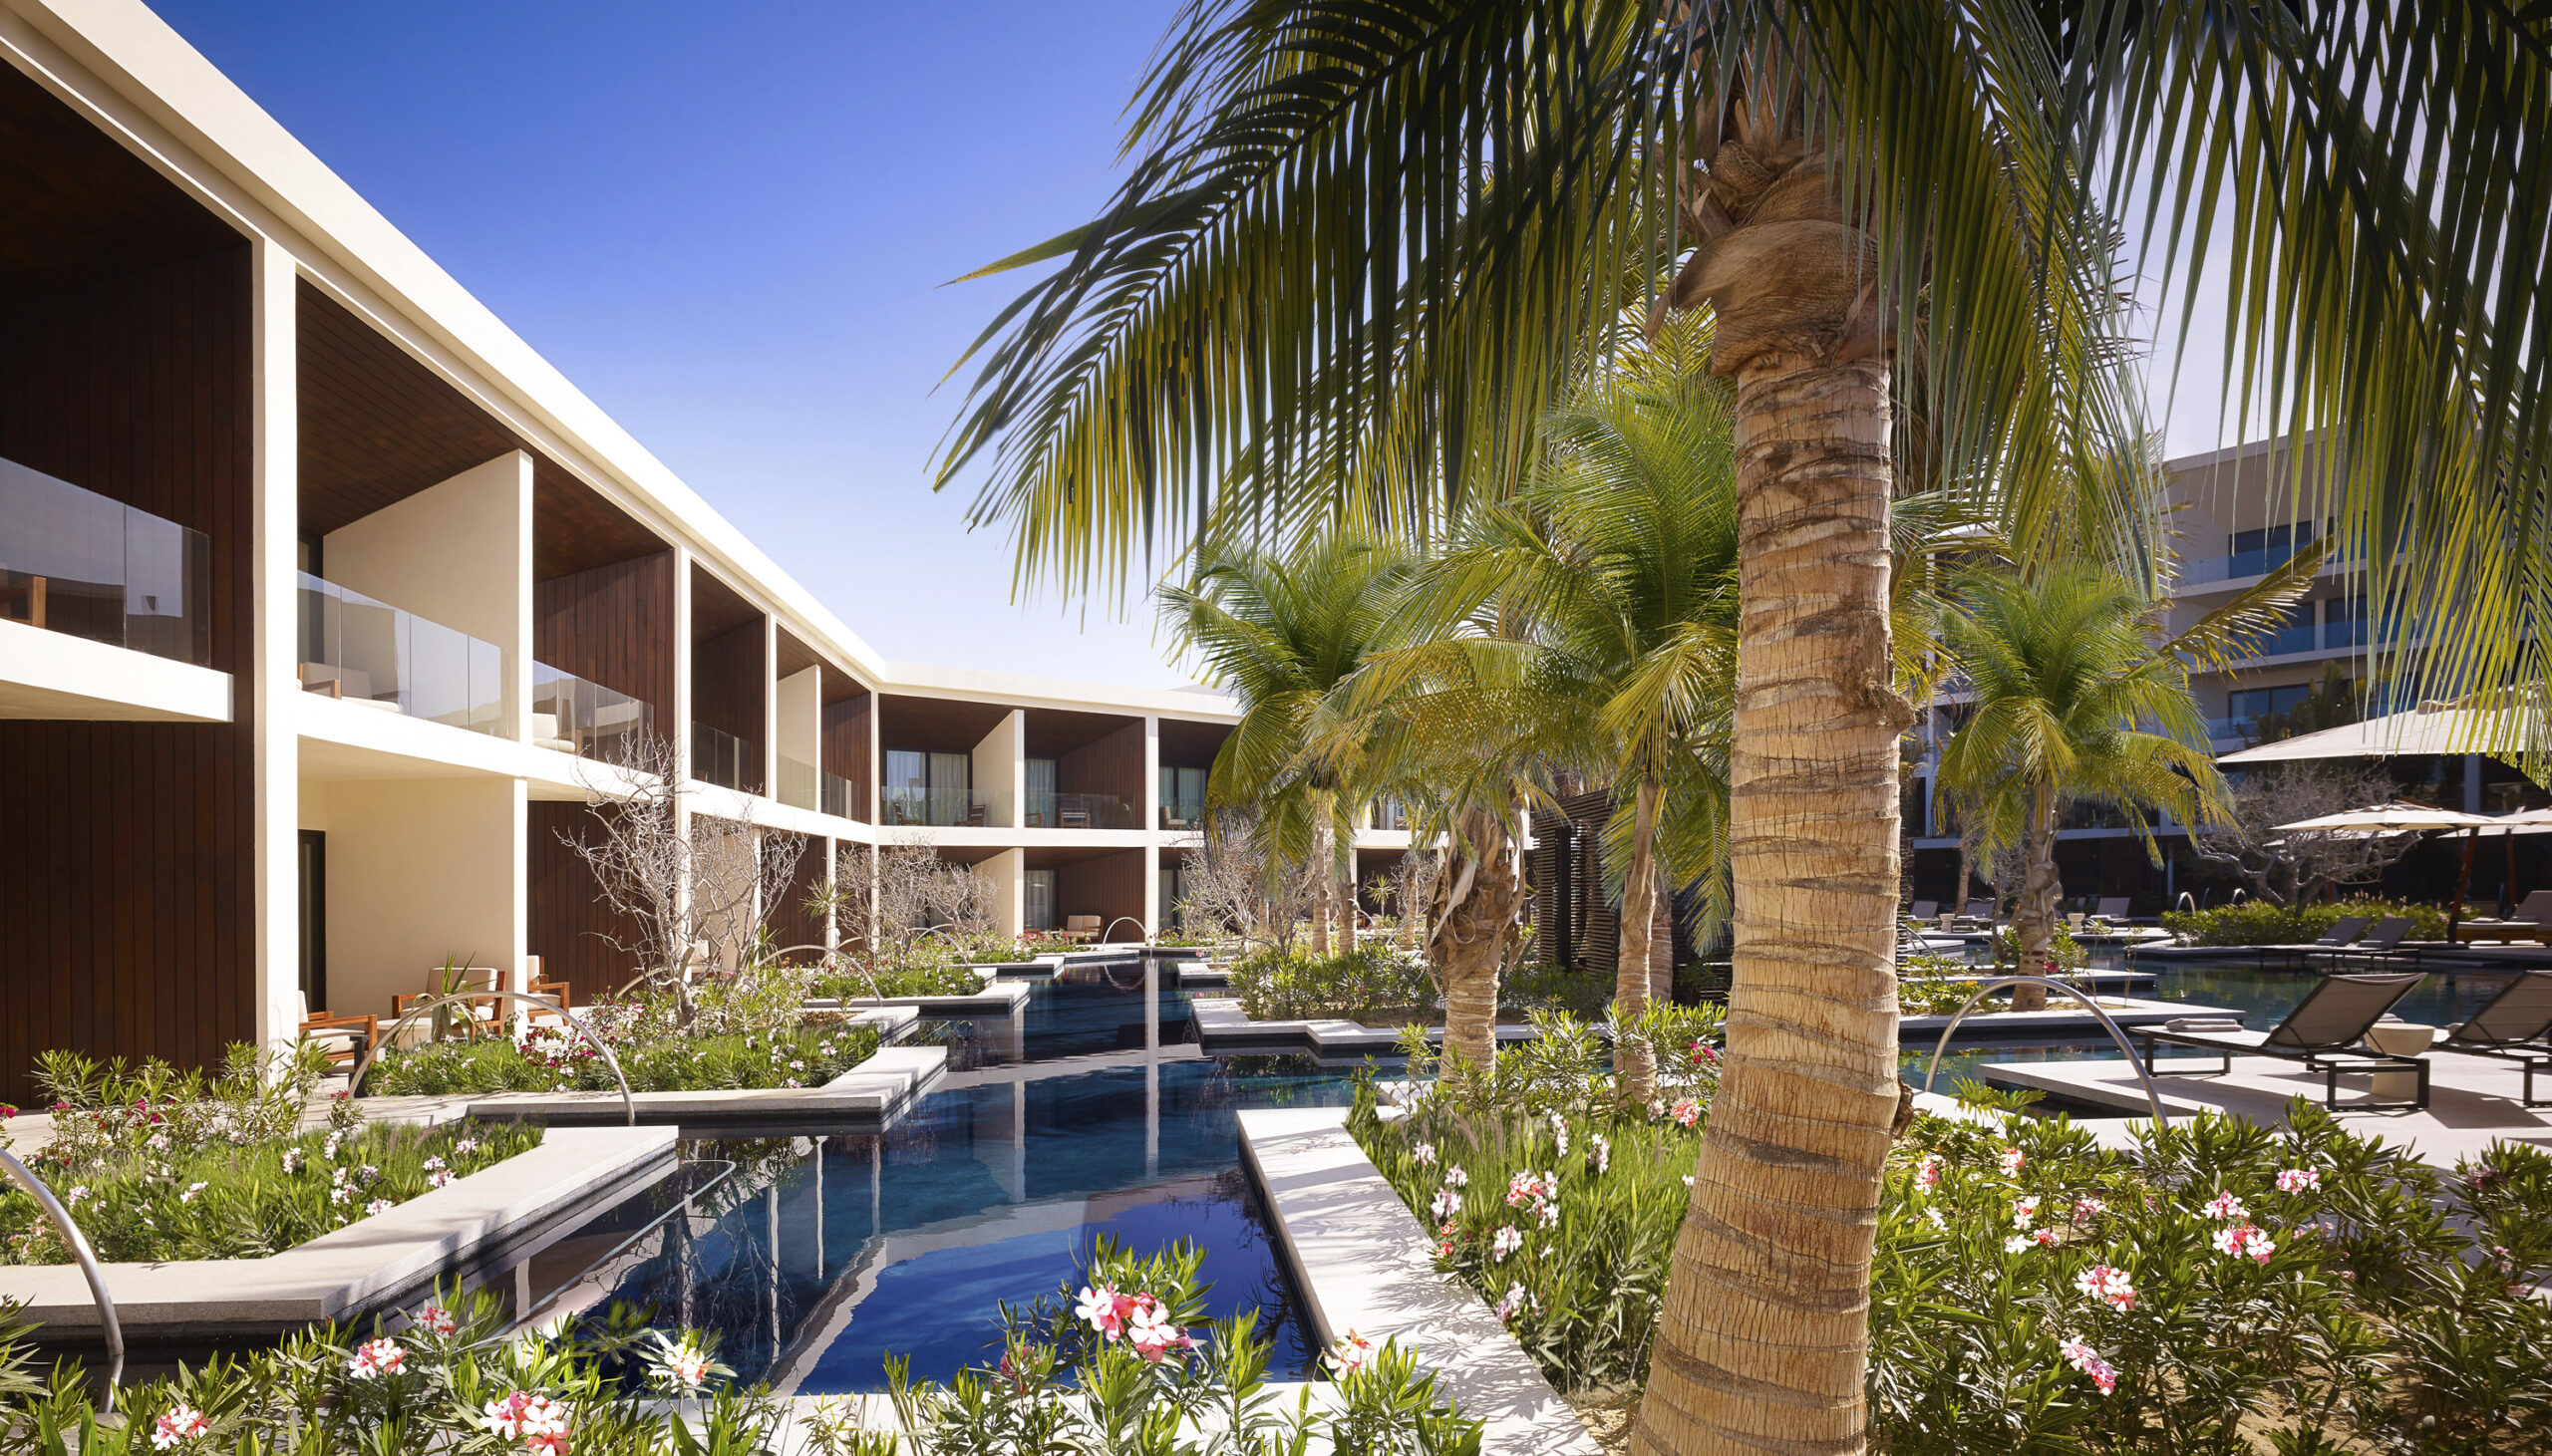 Nobu hotel los cabos architecture and landscape looking over the water feature with a tree